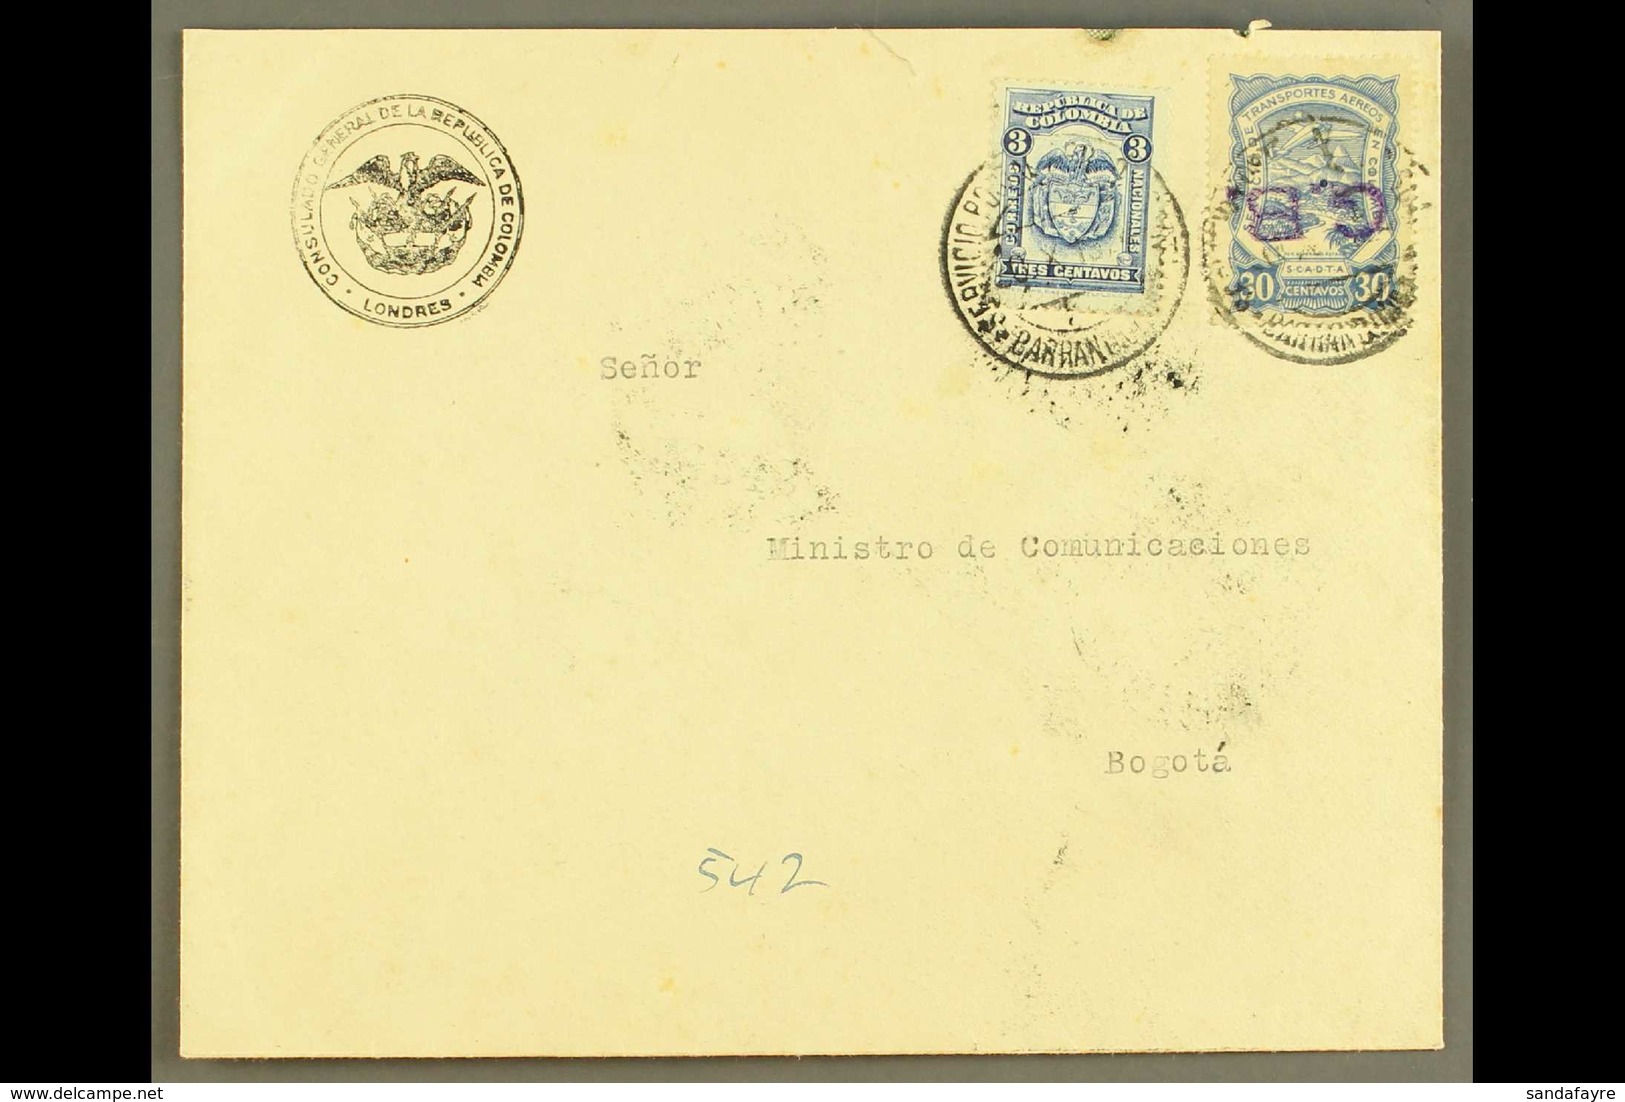 SCADTA 1924 Cover From England Addressed To Bogota, Bearing Colombia 3c And SCADTA 1923 30c With "G.B." Consular INVERTE - Colombie